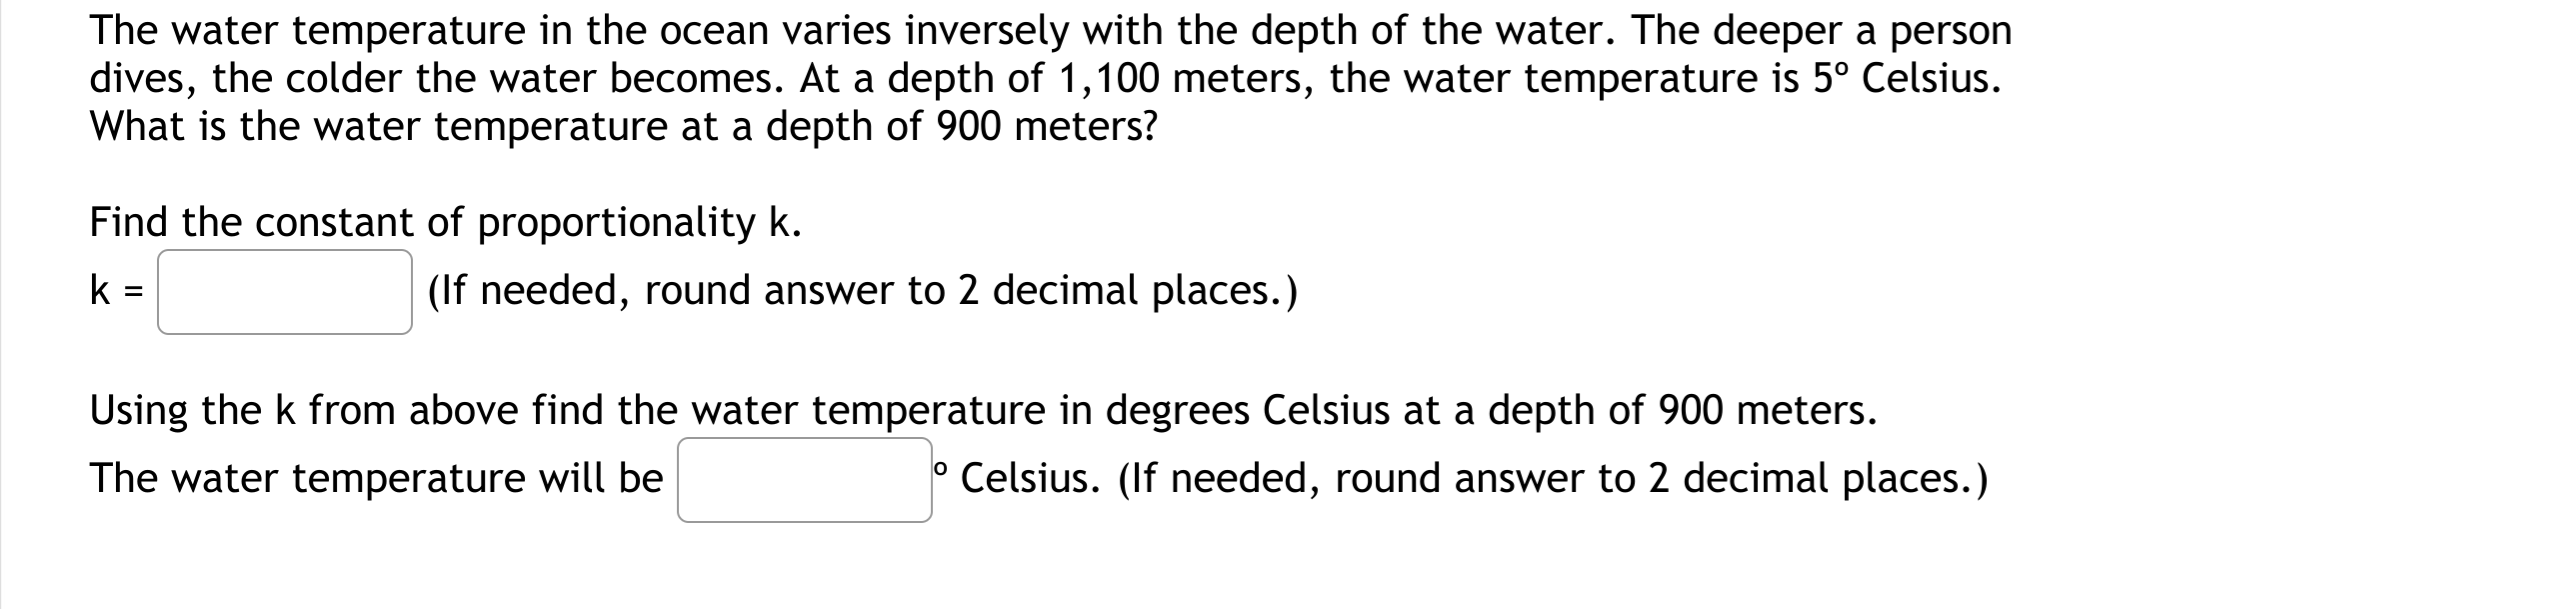 The water temperature in the ocean varies inversely with the depth of the water. The deeper a person
dives, the colder the water becomes. At a depth of 1,100 meters, the water temperature is 5° Celsius.
What is the water temperature at a depth of 900 meters?
Find the constant of proportionality k.
k =
(If needed, round answer to 2 decimal places.)
Using the k from above find the water temperature in degrees Celsius at a depth of 900 meters.
The water temperature will be
Celsius. (If needed, round answer to 2 decimal places.)
